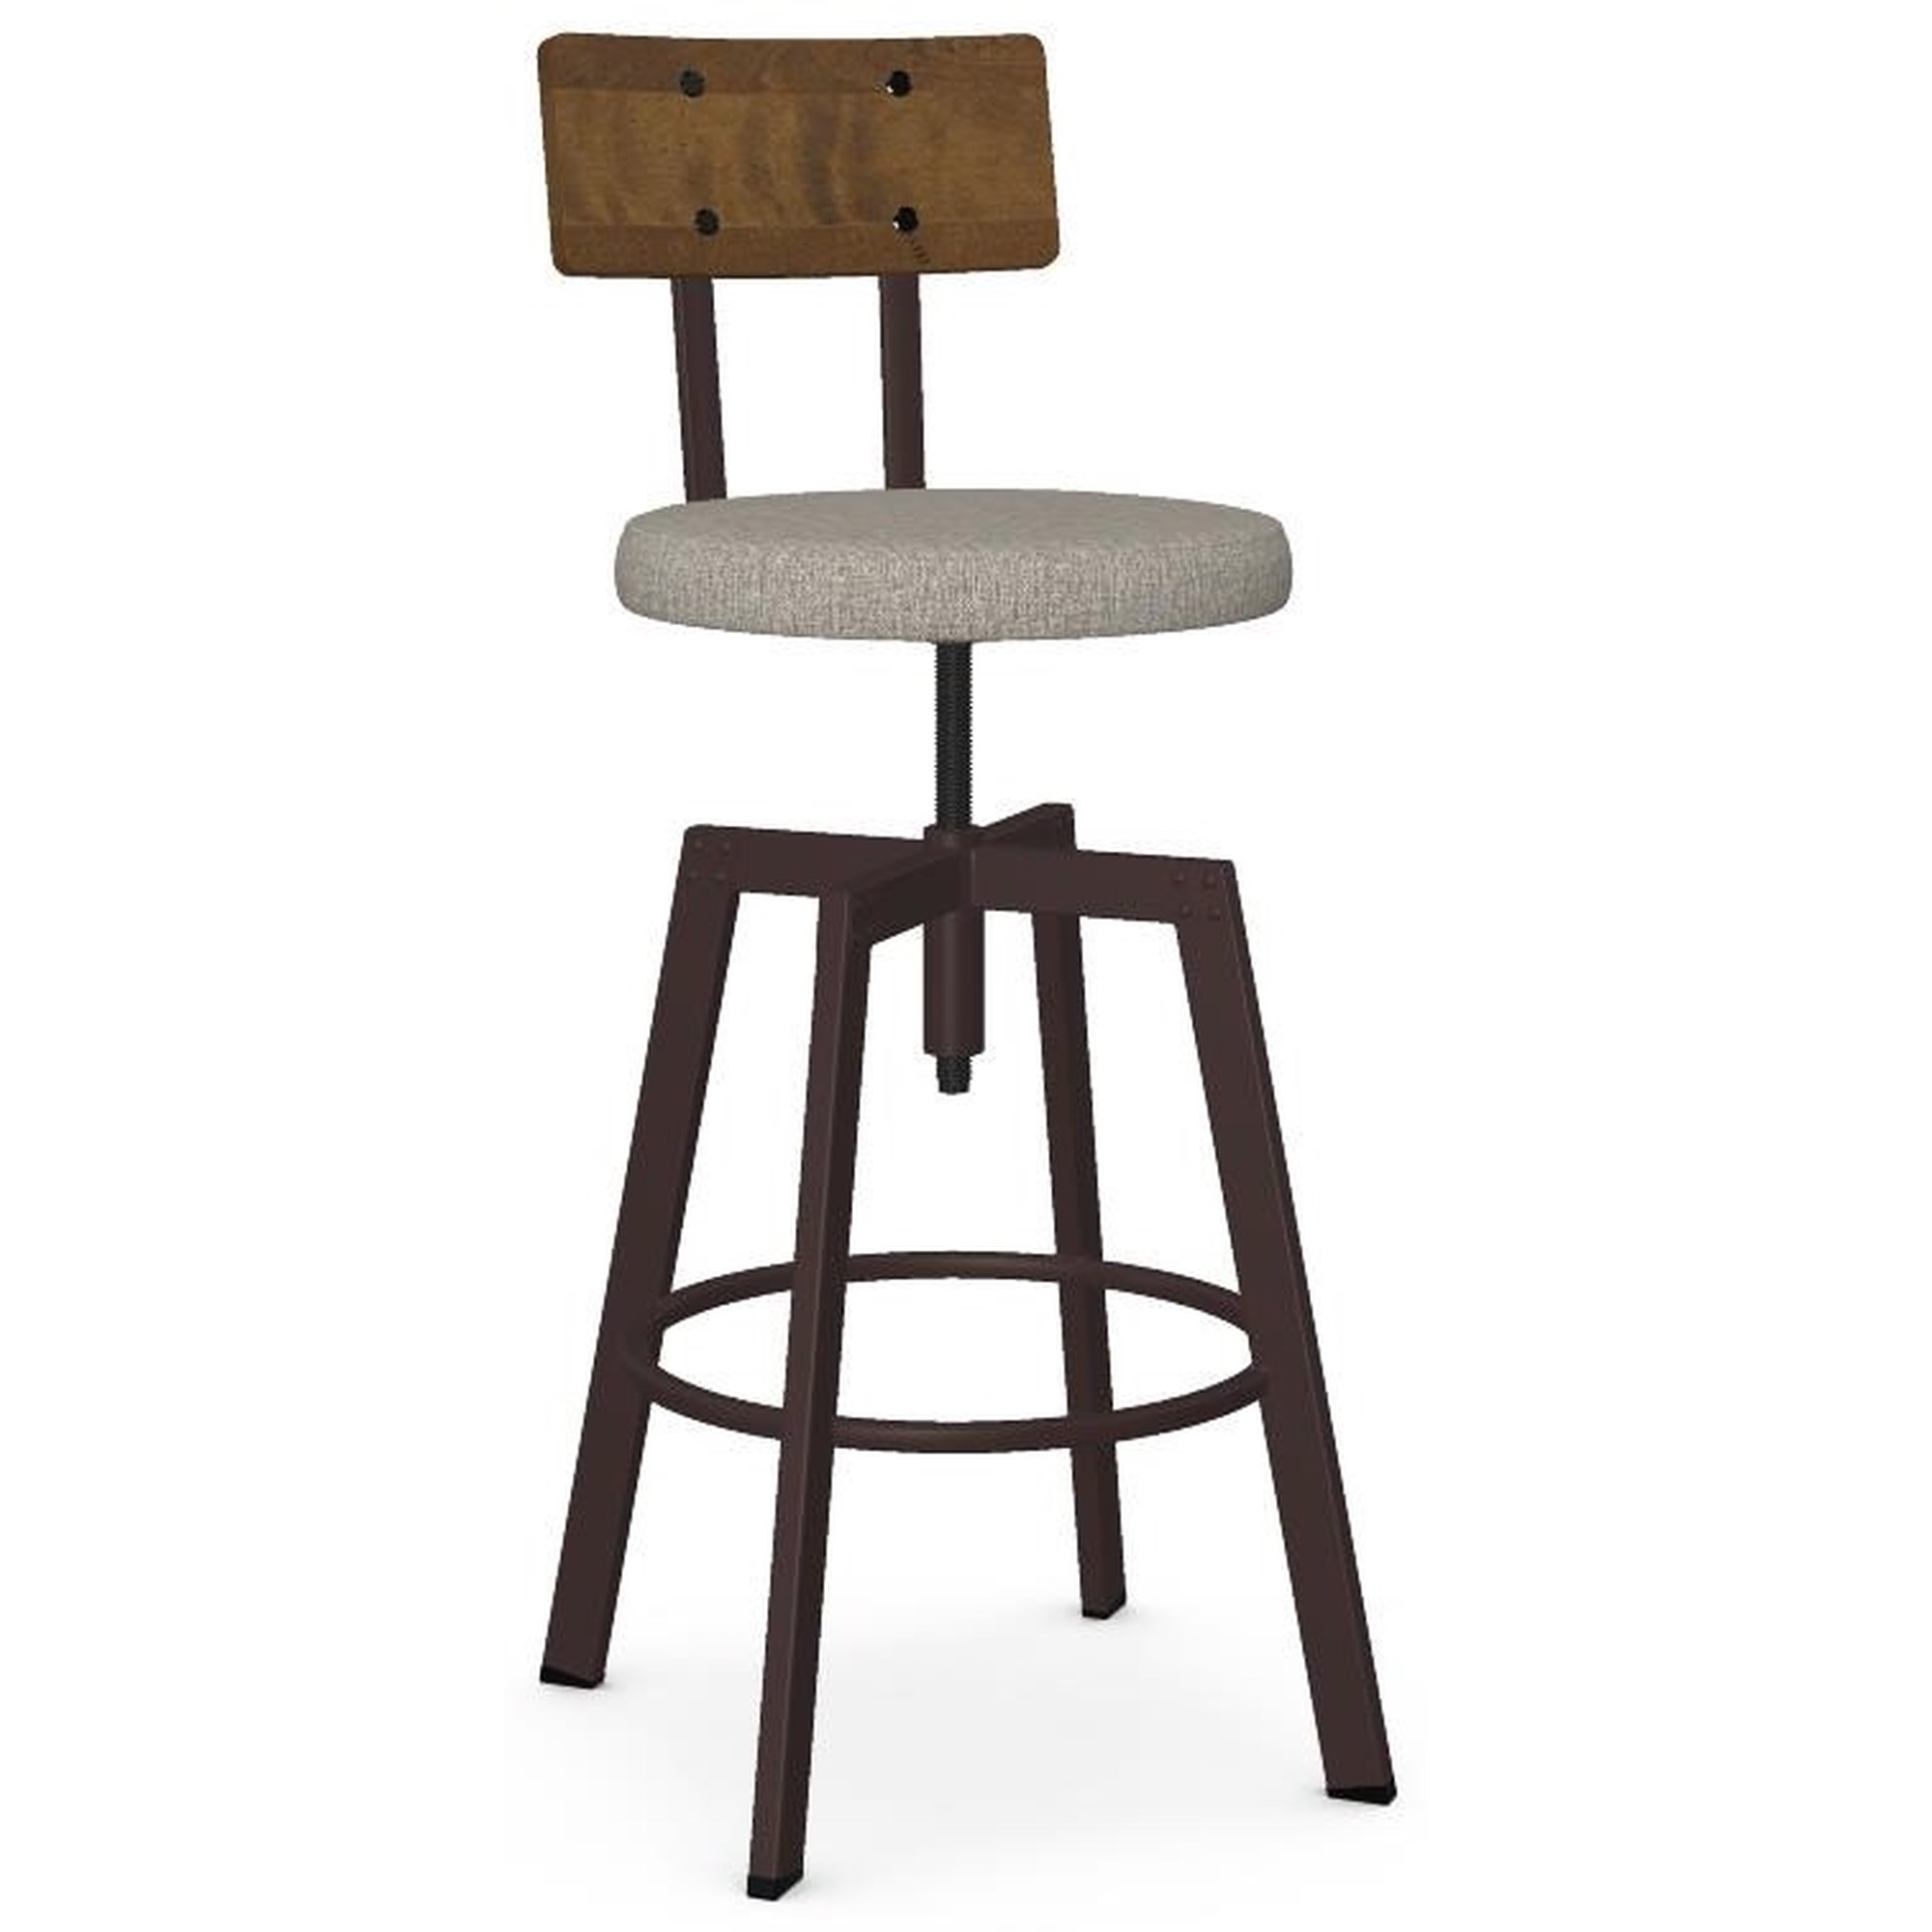 Amisco's Uplift Adjustable Screw Stool with Low Back • Barstool Comforts